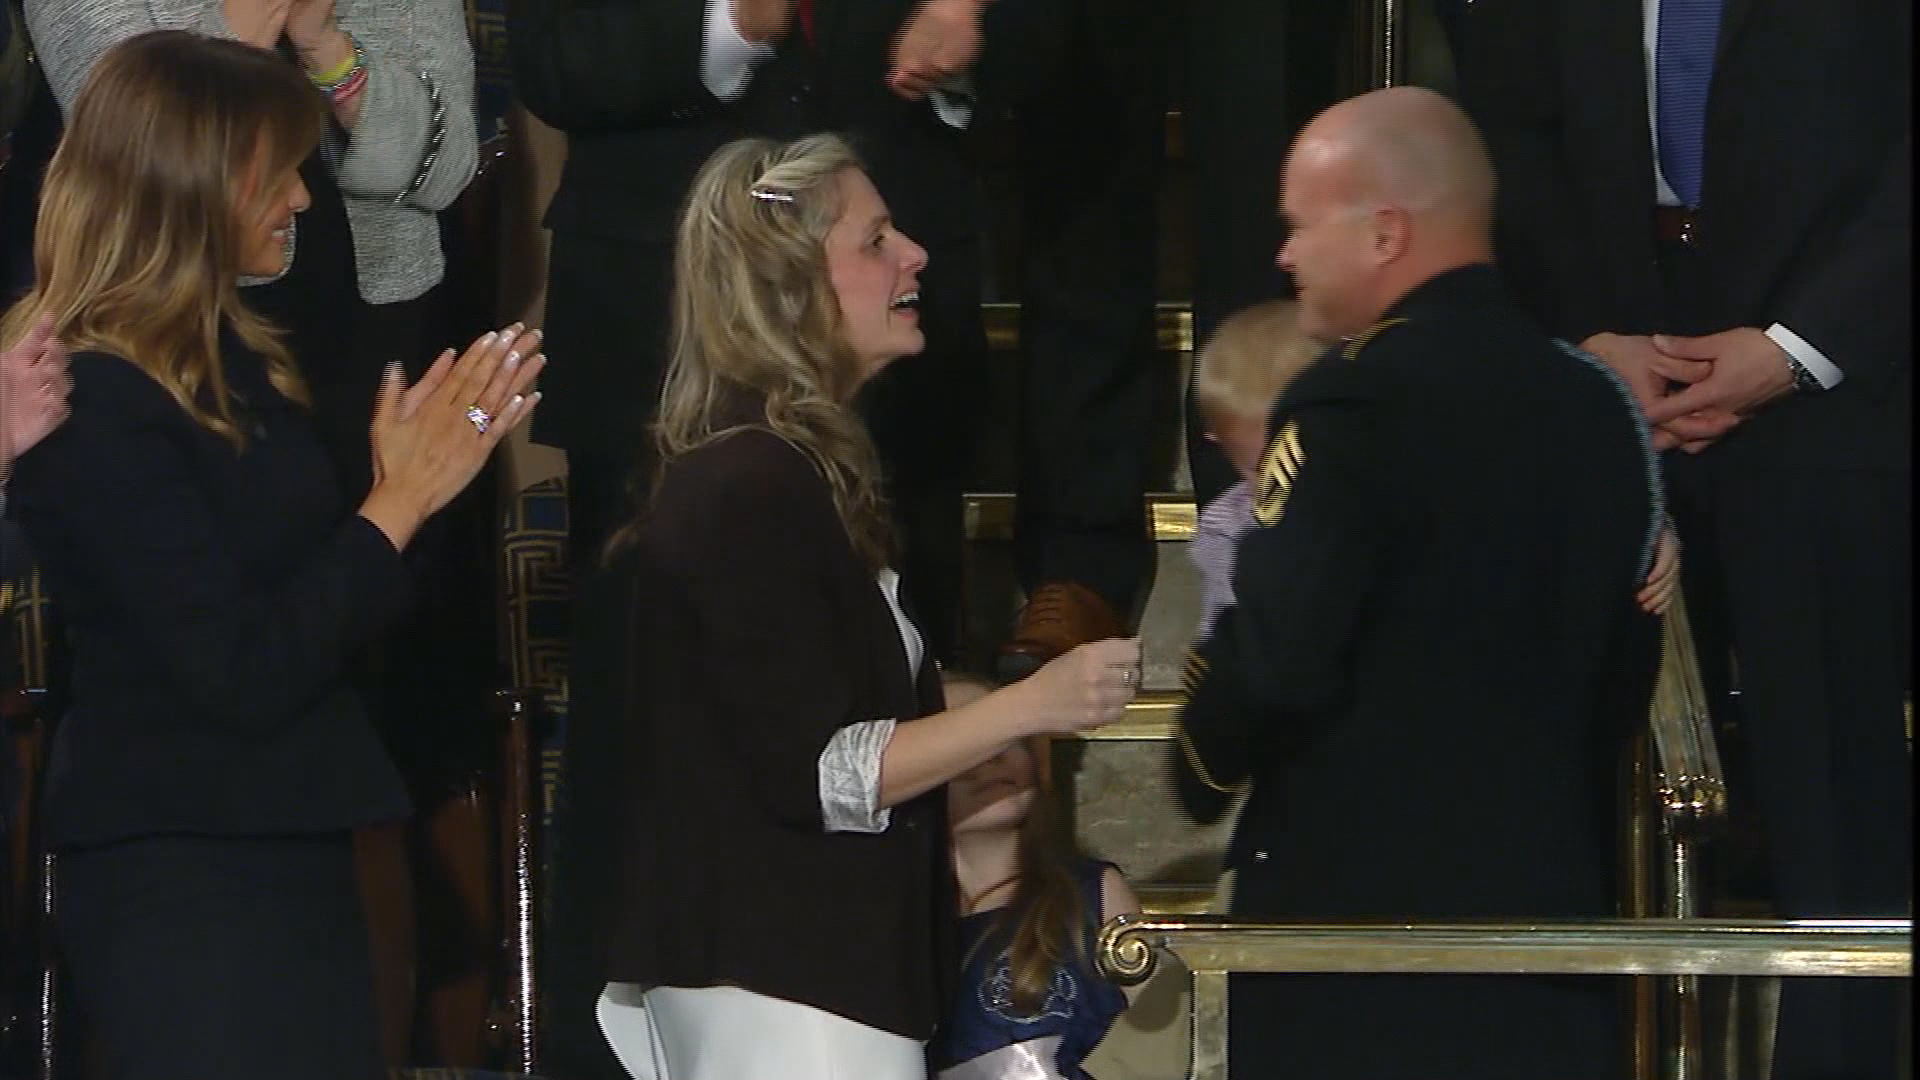 President Trump thanked a military wife, Amy Williams, for her sacrifice. Her husband, Sgt. 1st Class Townsend Williams, has been deployed for several months.